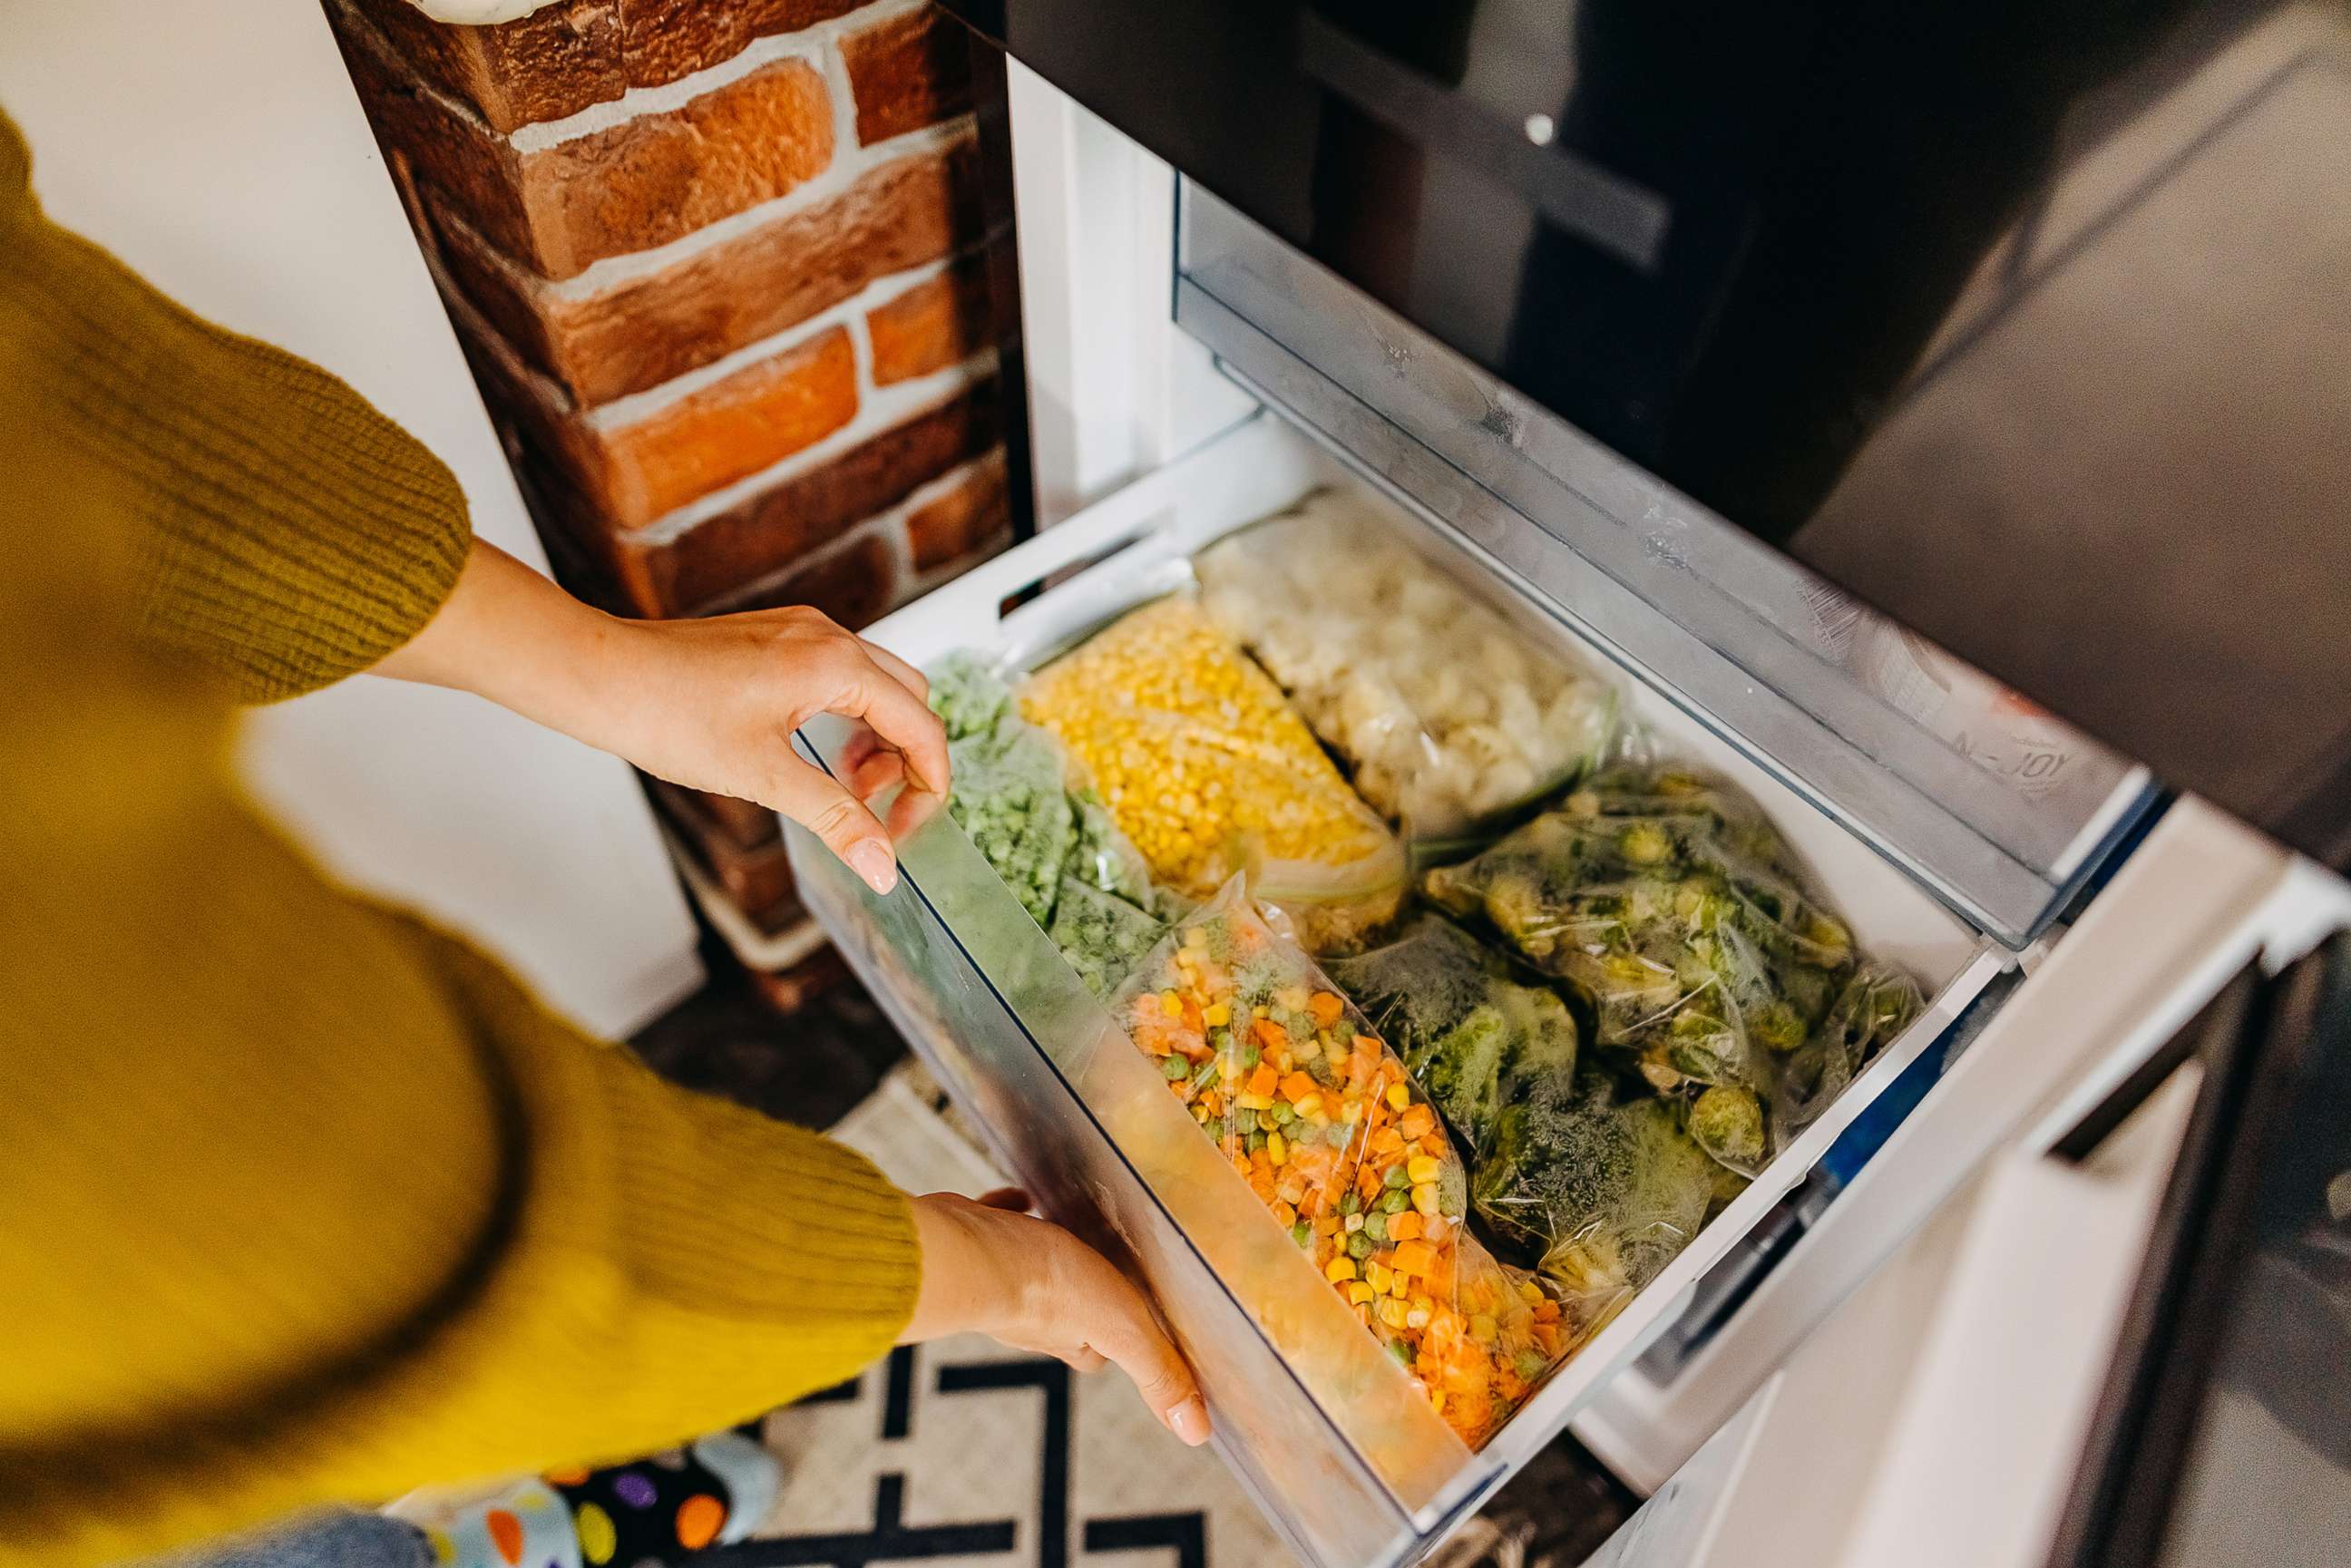 PHOTO: Woman putting container with frozen mixed vegetables to refrigerator